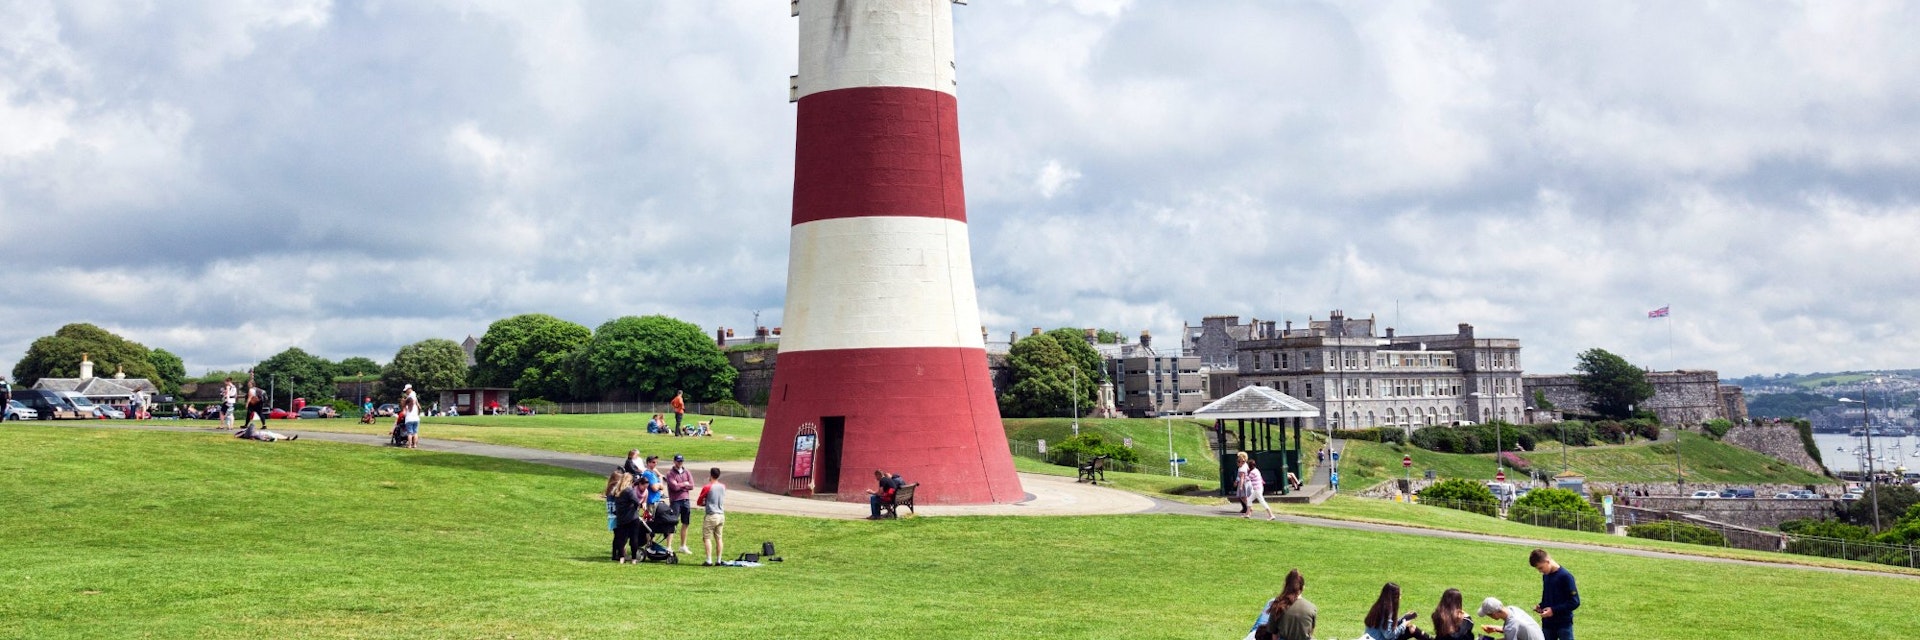 2 June 2018: Devon, UK - Smeaton's Tower is the third Eddystone Lighthouse, built by John Smeaton, which was dismantled and rebuilt on Plymouth Hoe as a memorial.; Shutterstock ID 1194001051; your: Bridget Brown; gl: 65050; netsuite: Online Editorial; full: POI Image Update